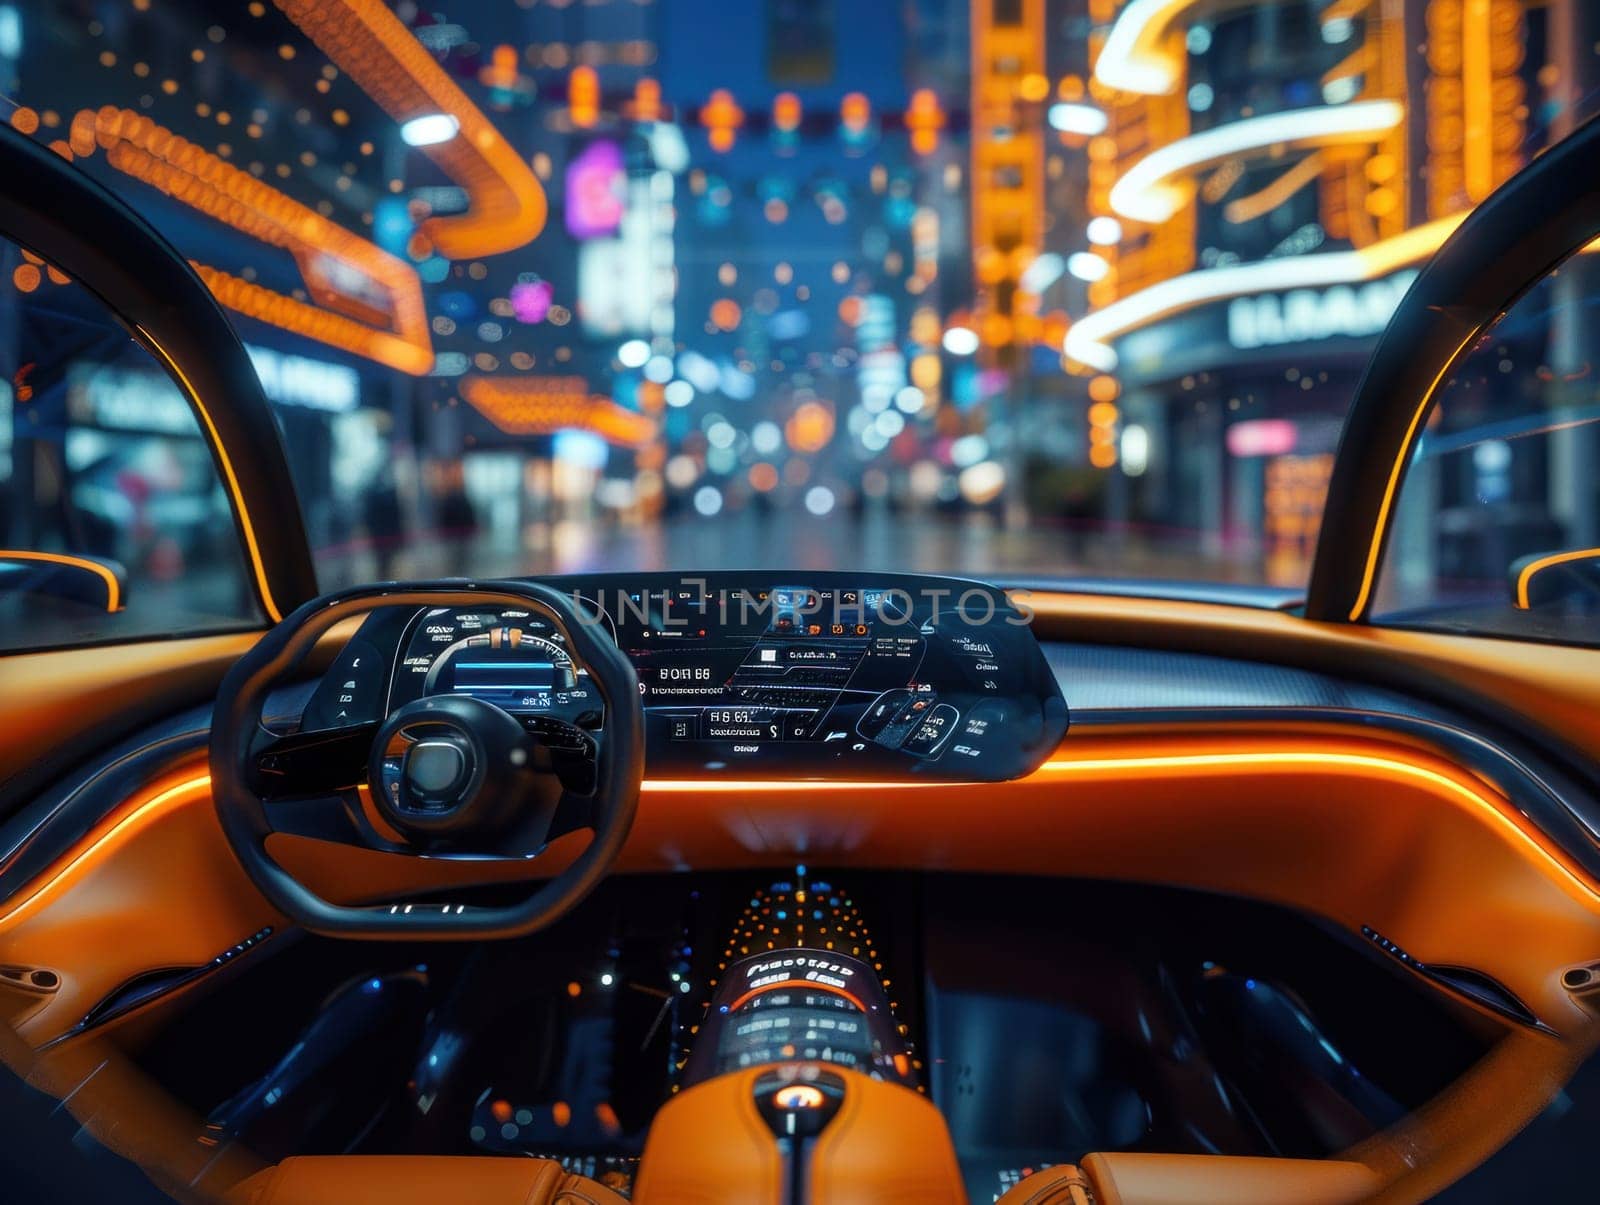 Interior view of an electric car cruising through the city streets at night, with illuminated buildings and traffic lights visible through the windshield.